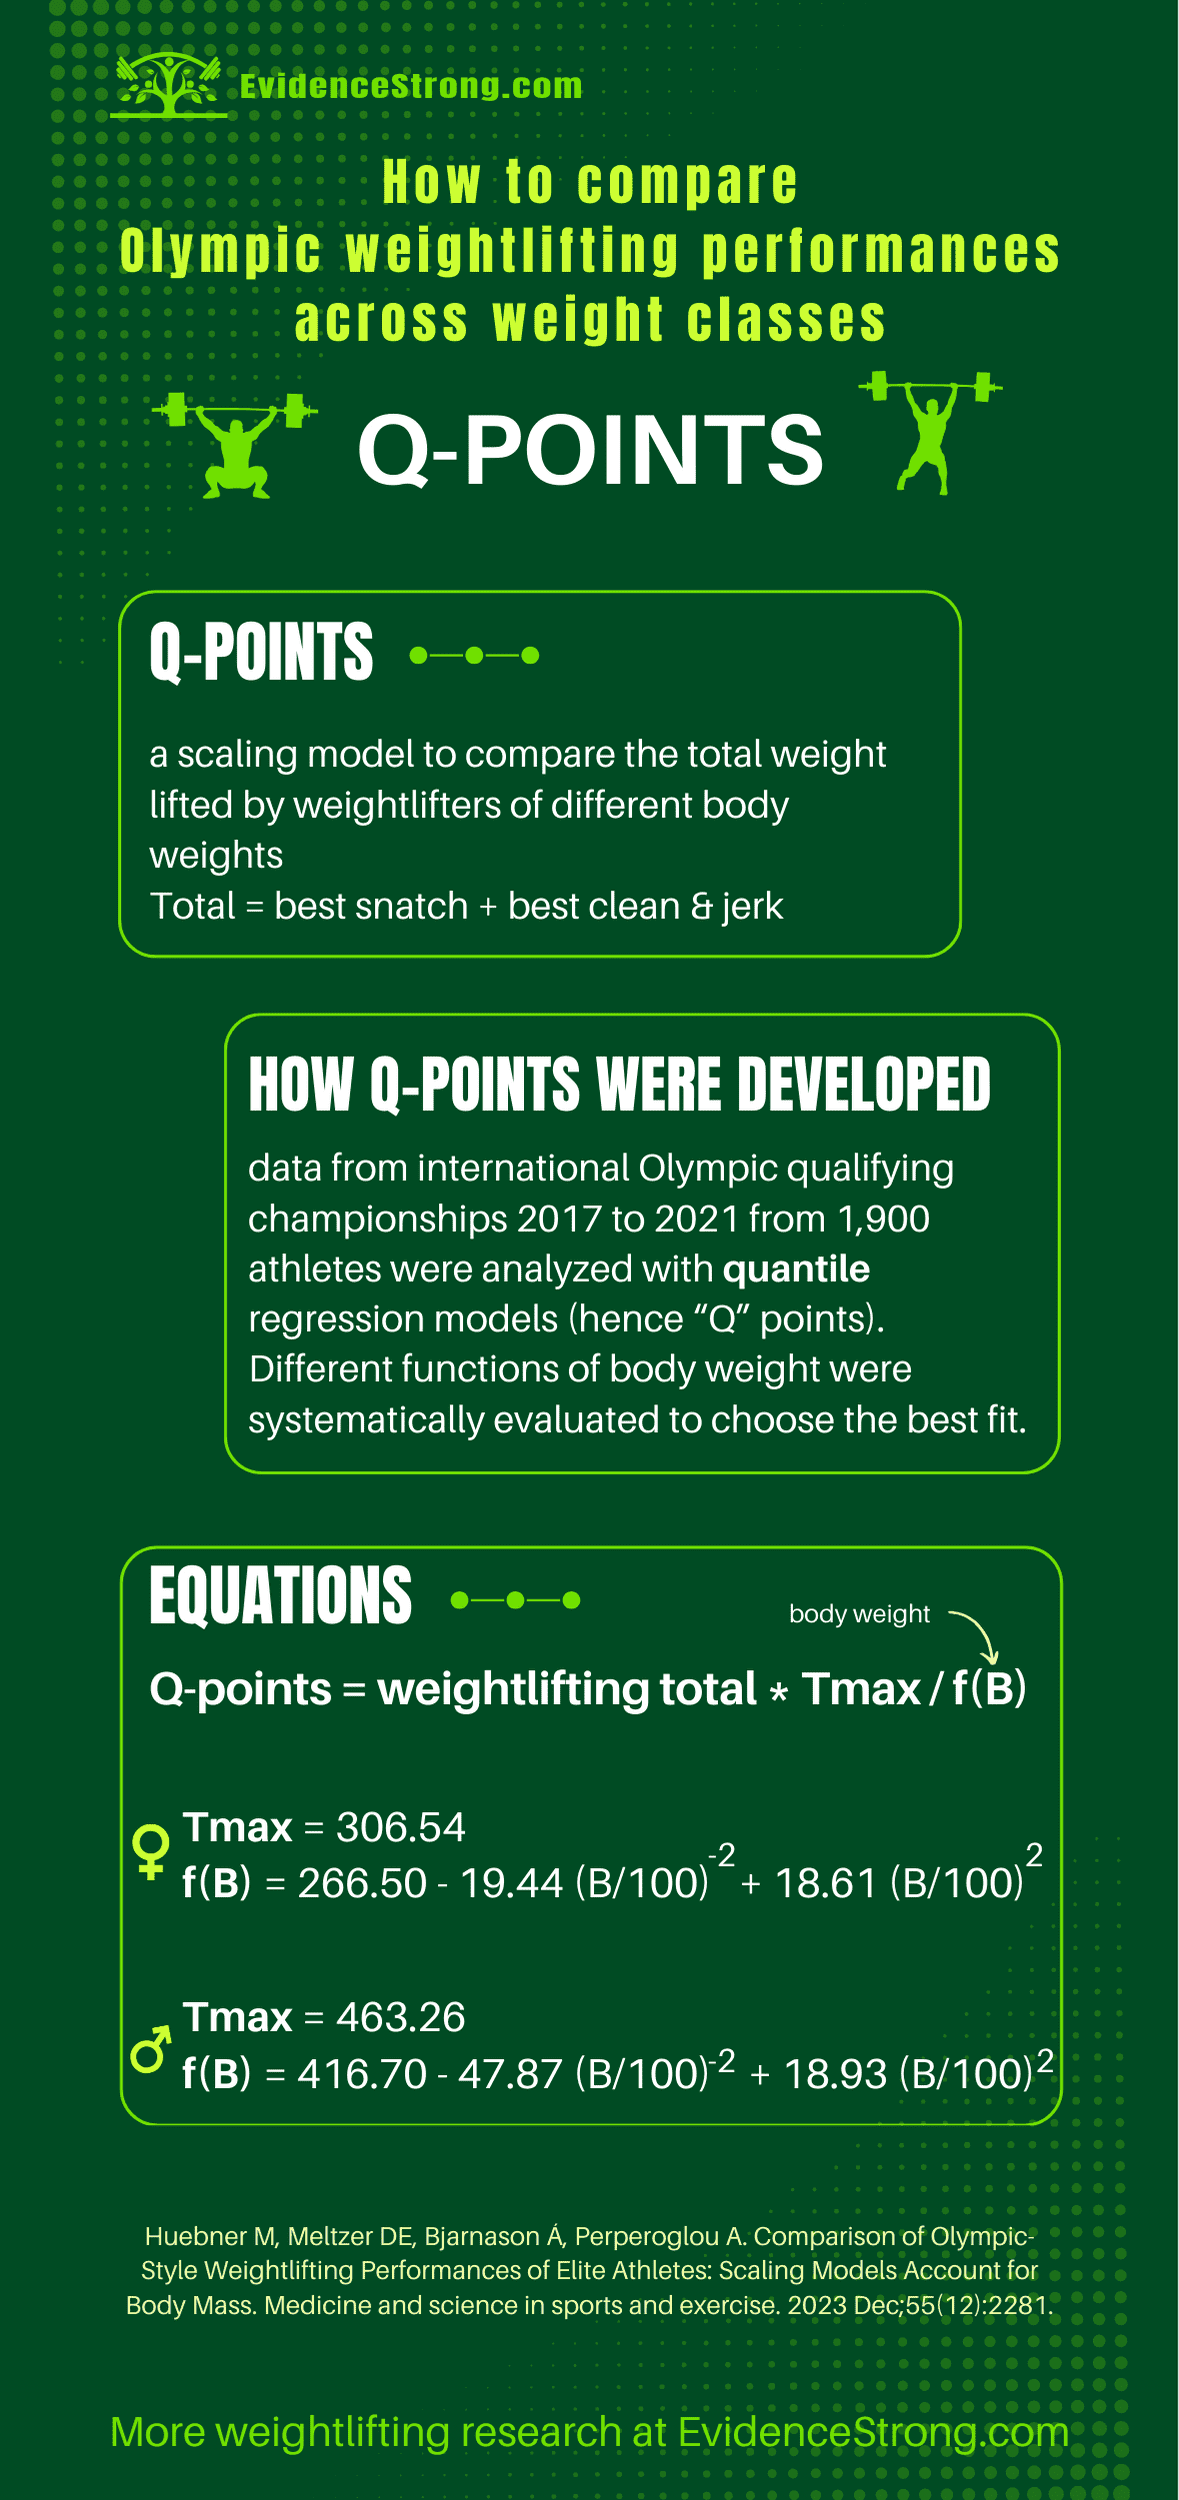 How to compare weightlifting performance between different weight classes -  Q-points